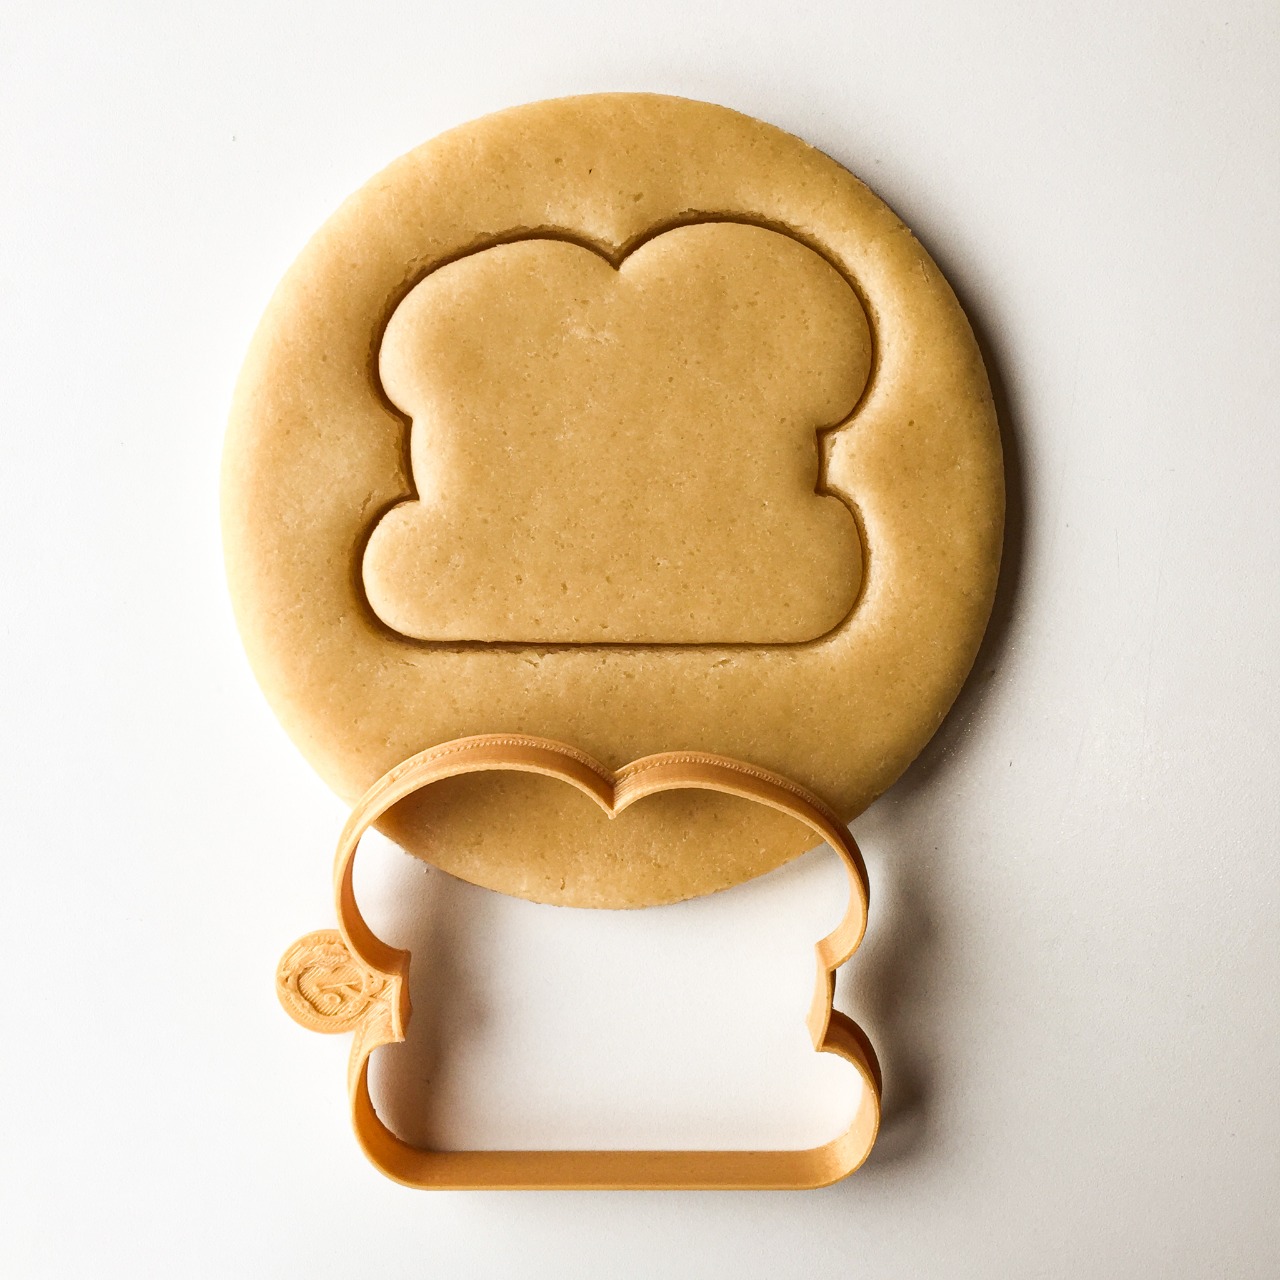 Bunny Name Tag Cookie Cutter